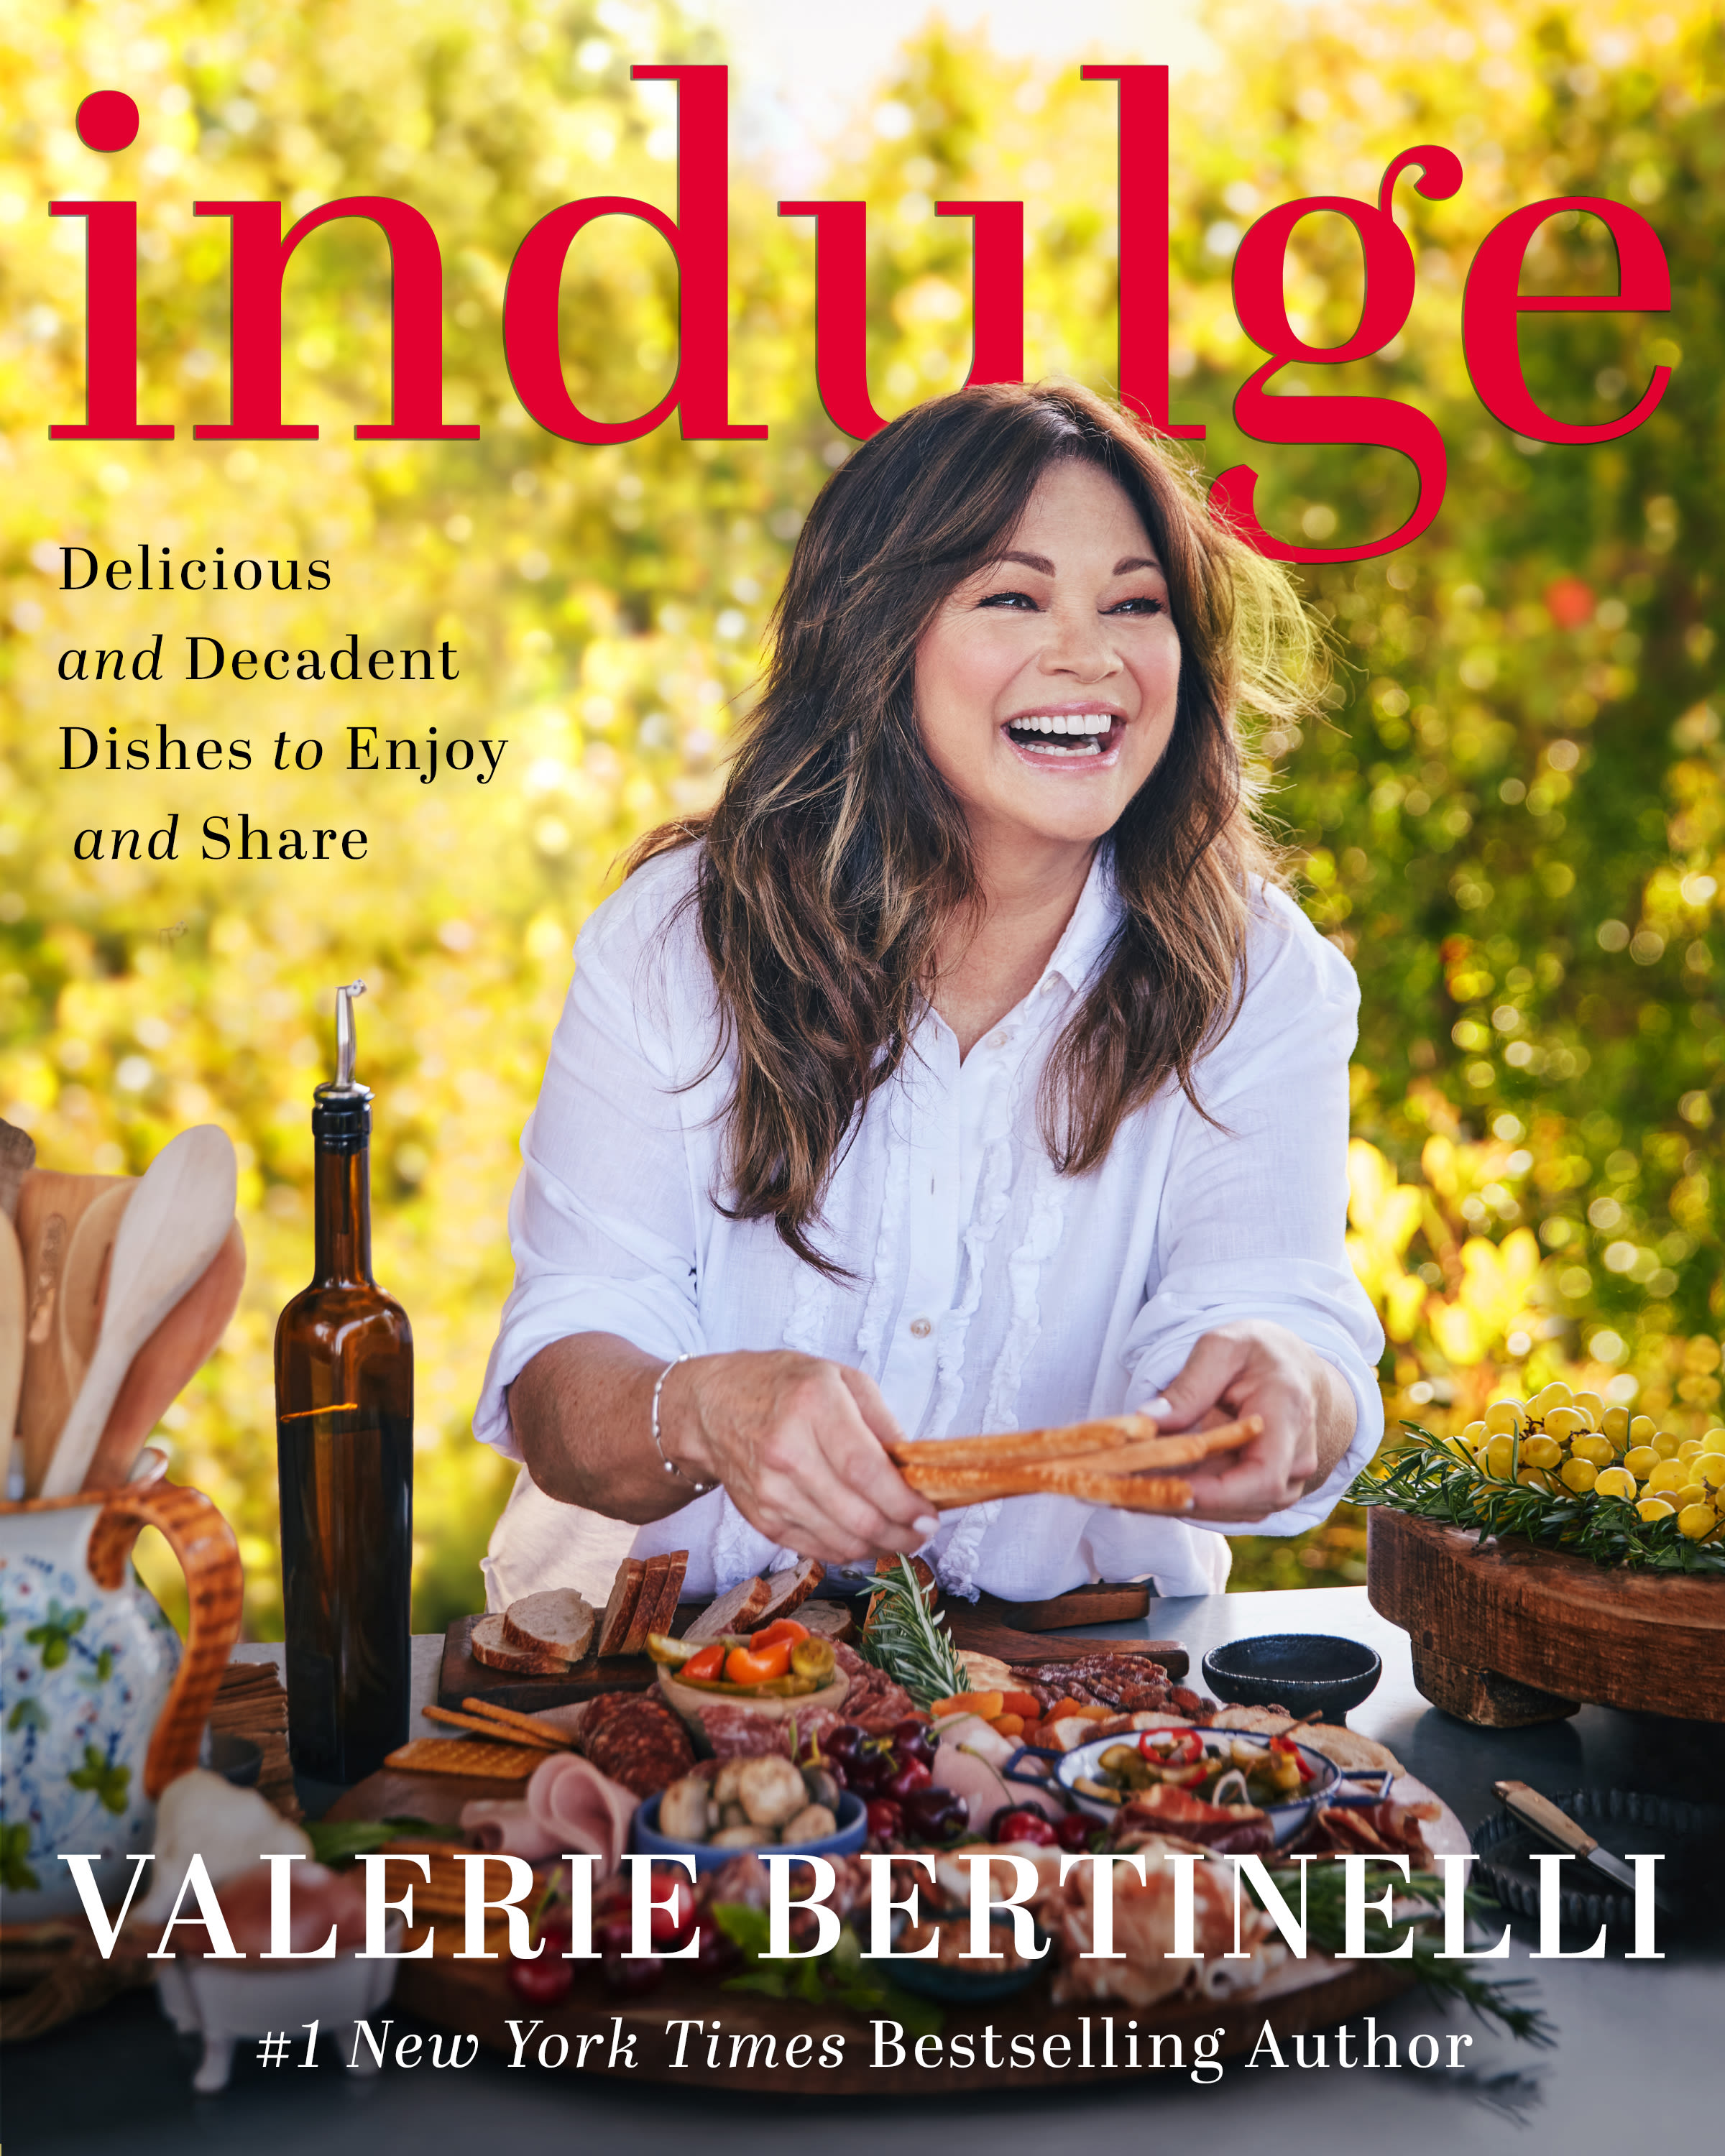 Valerie Bertinelli gives us all permission to indulge